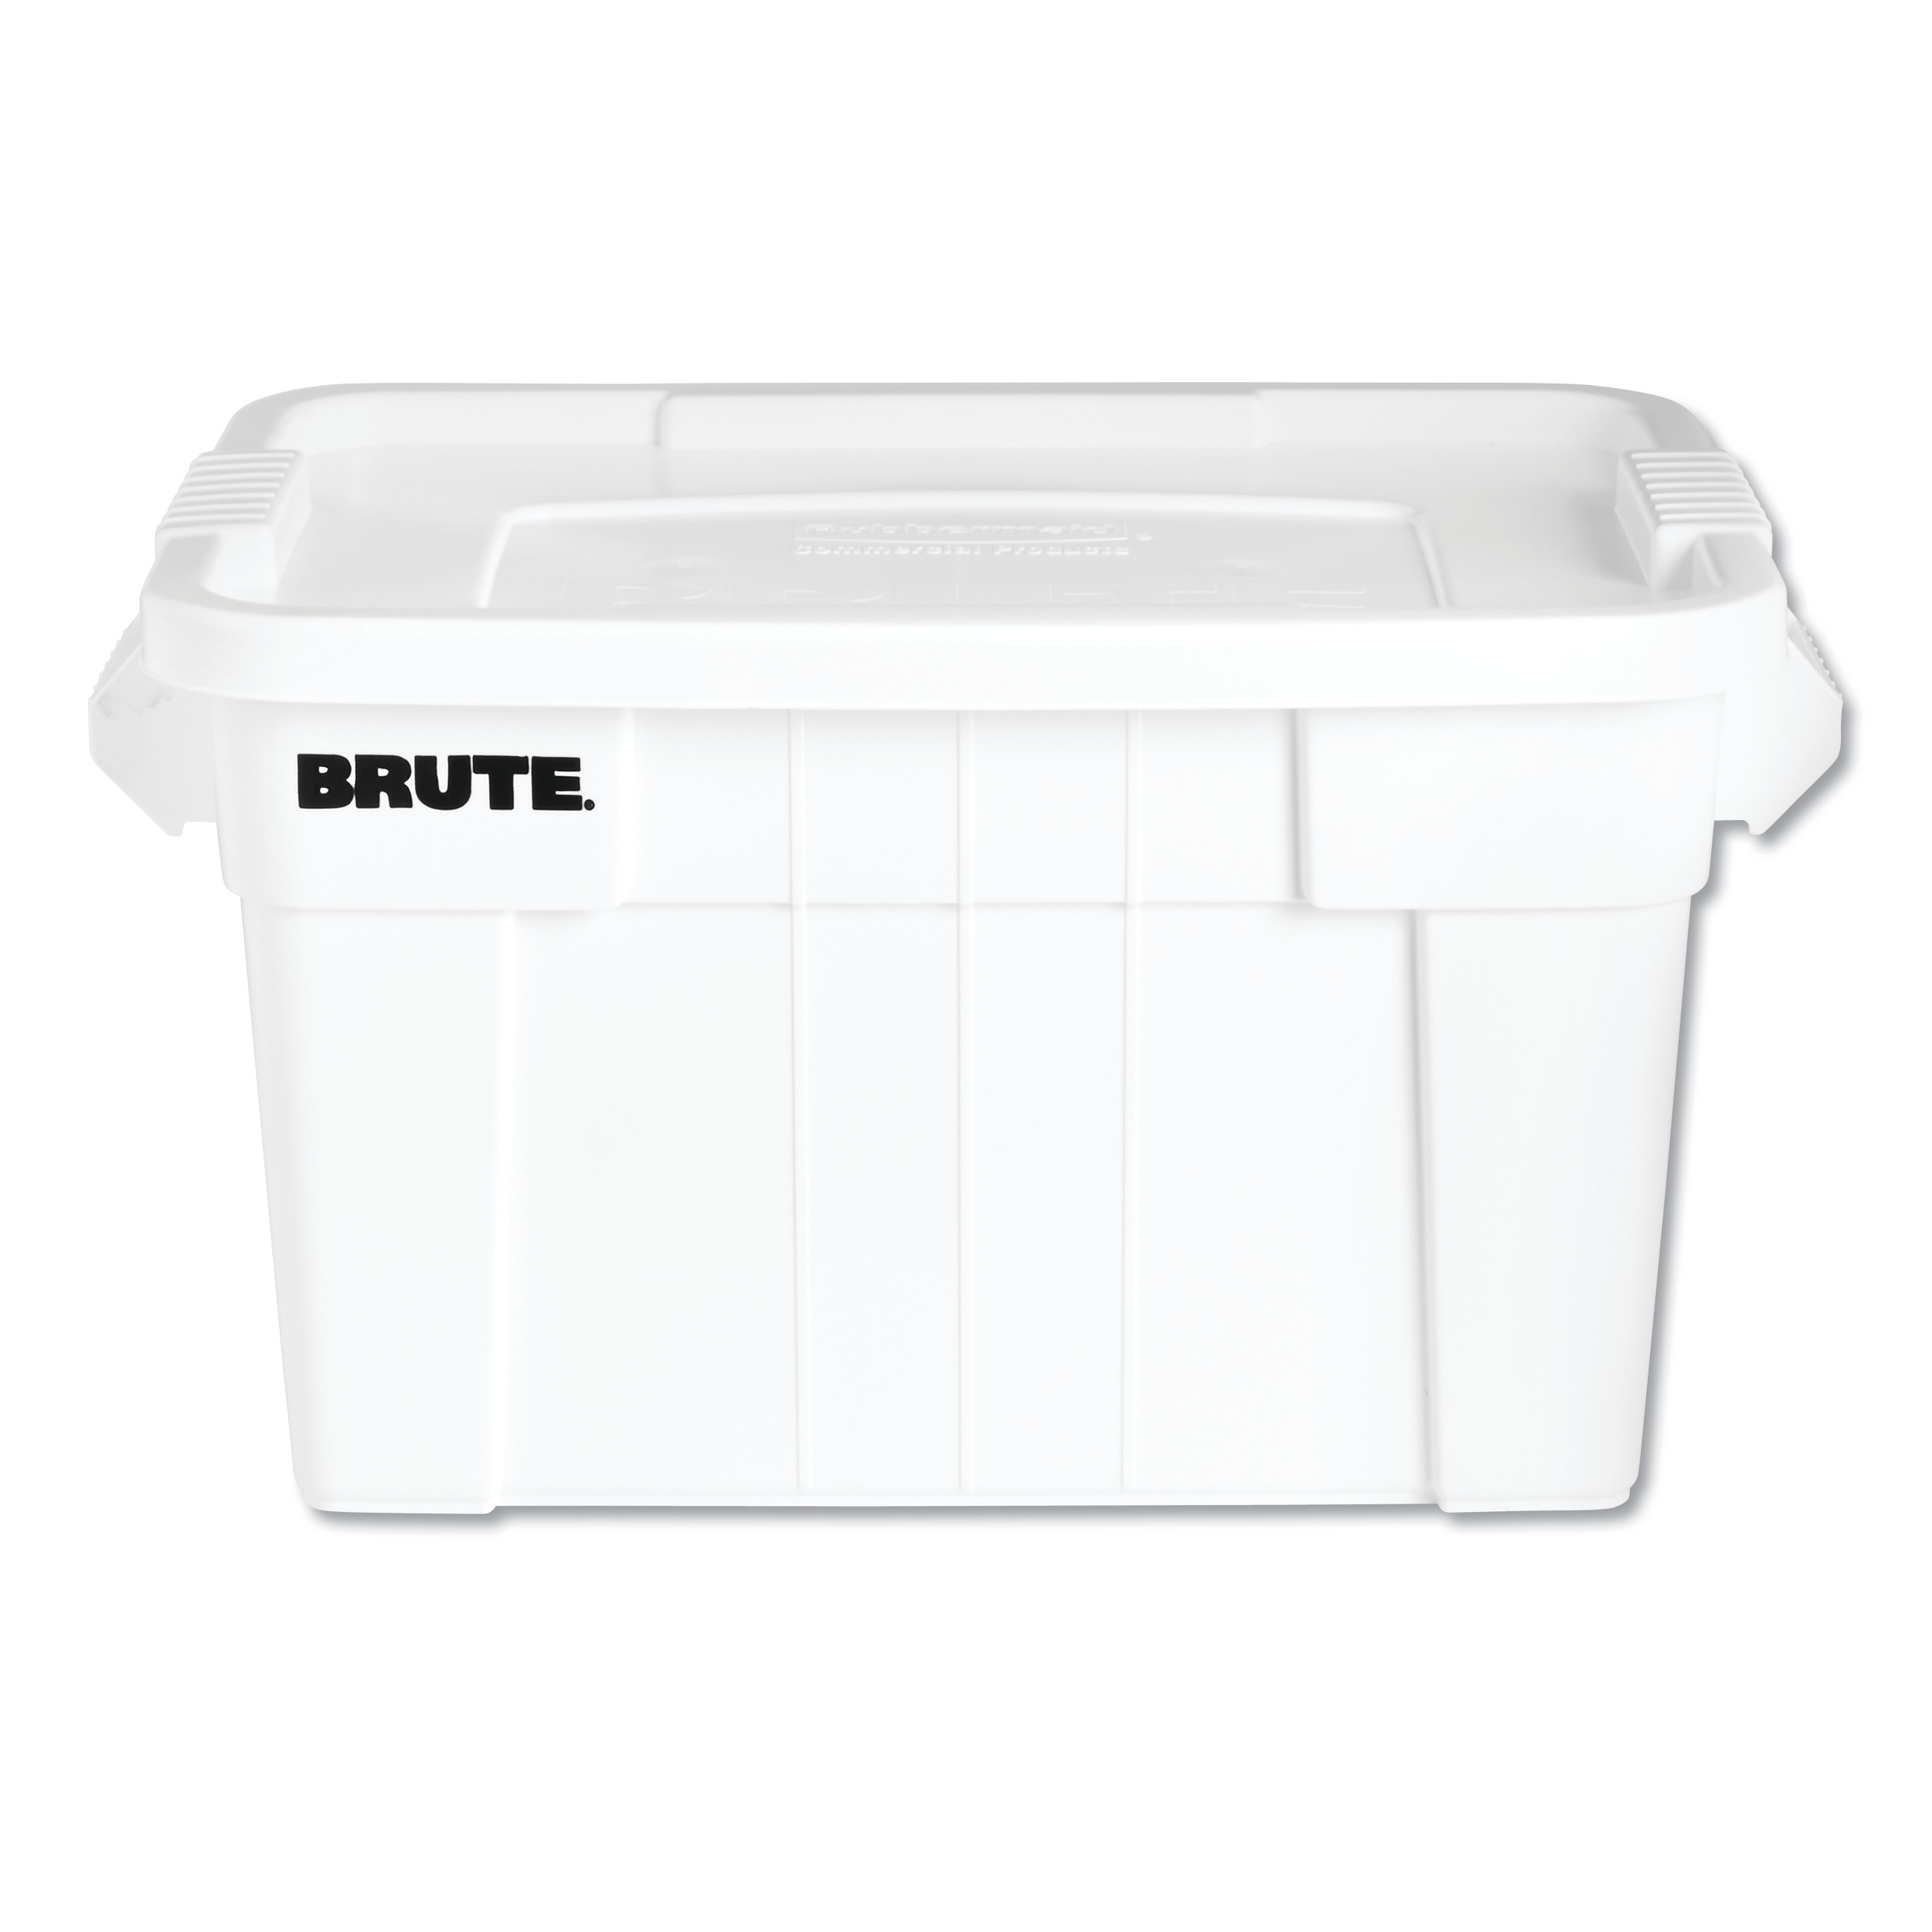 BRUTE Tote with Lid, 20 gal, 27.9w x 17.4d x 15.1h, White, 6/Carton